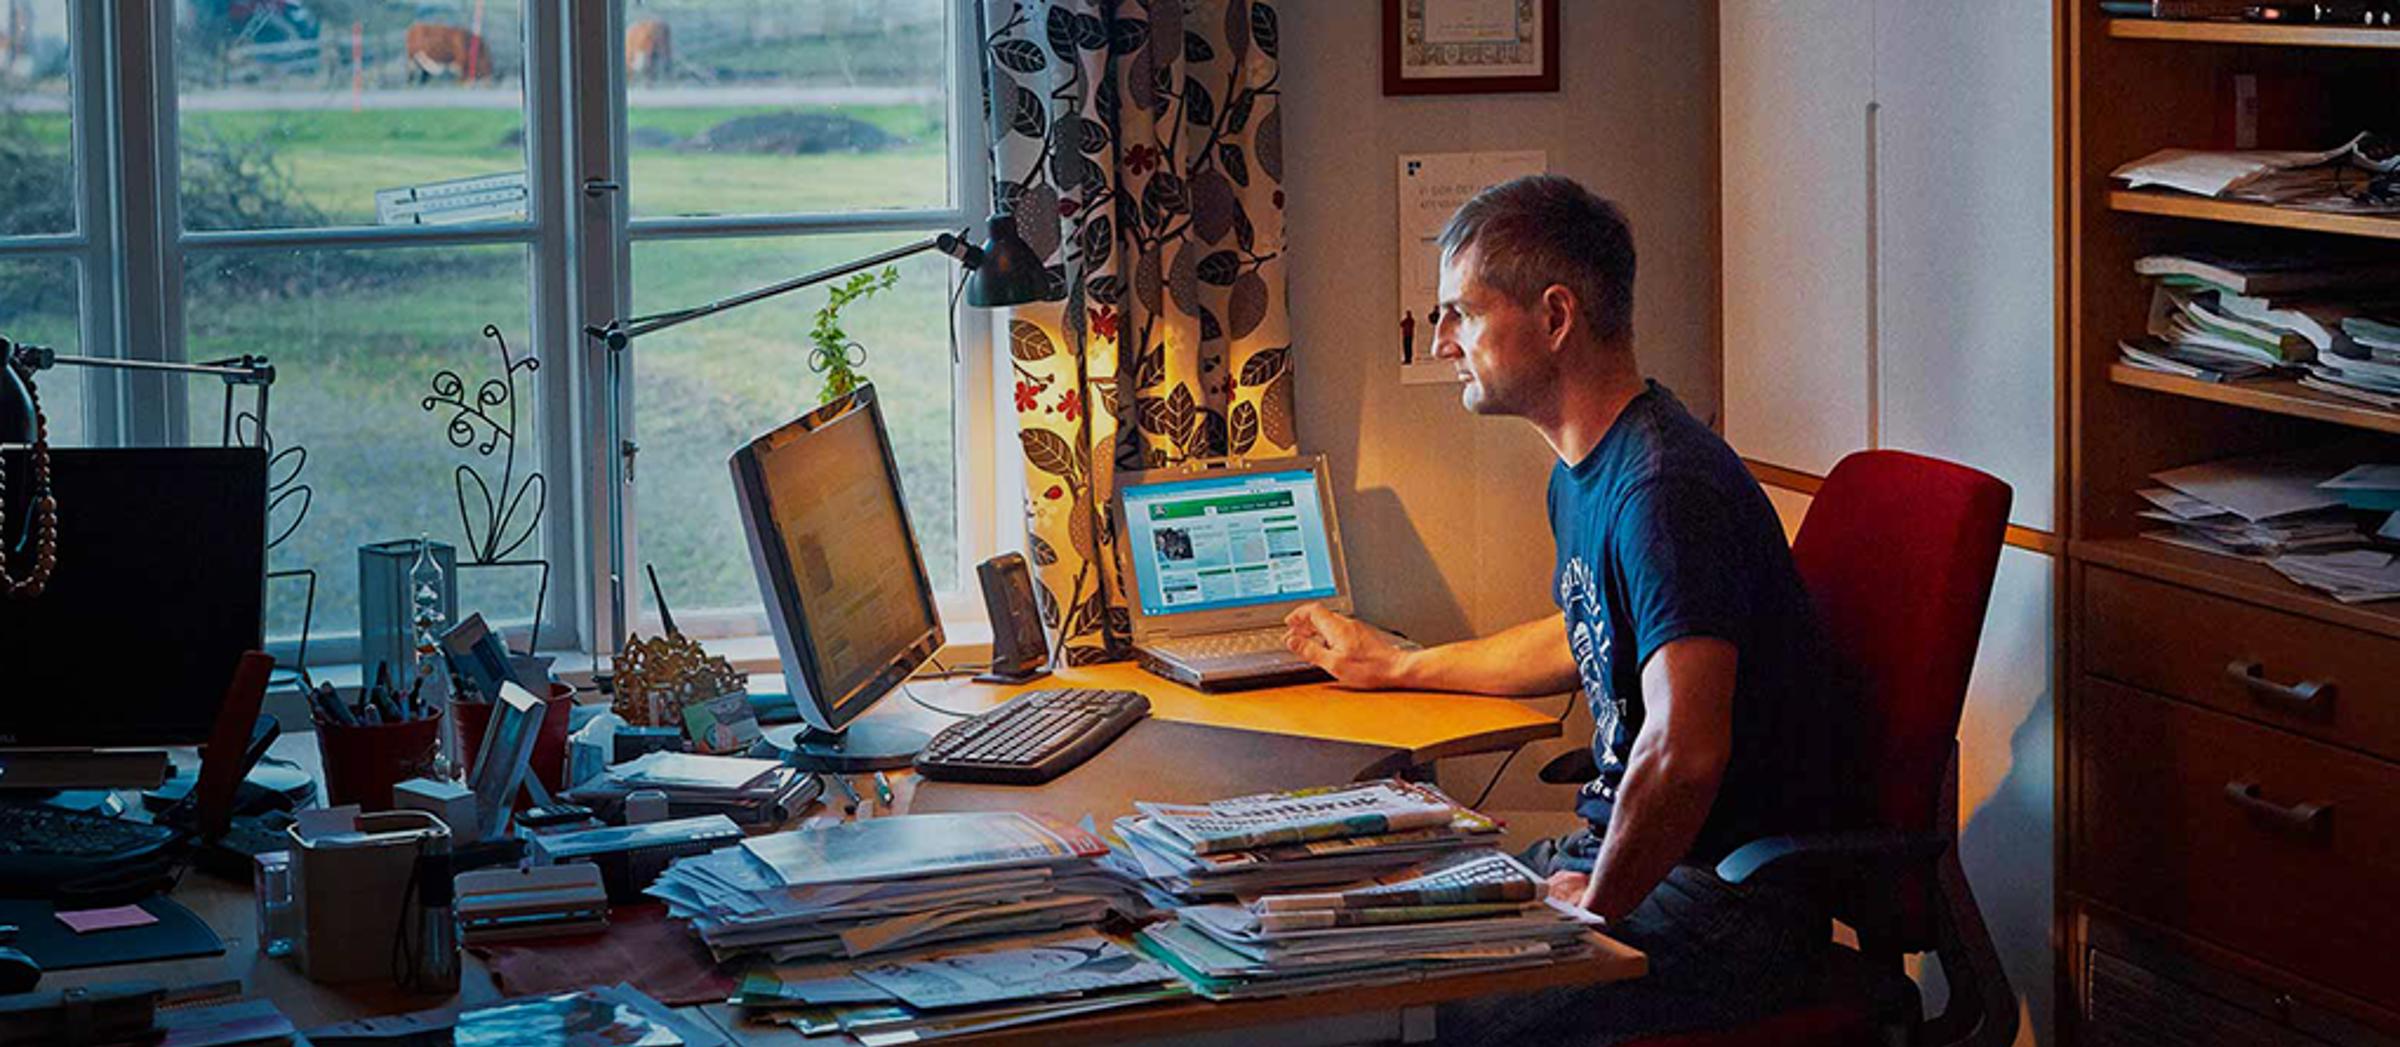 A farmer sat at a desk in his home office